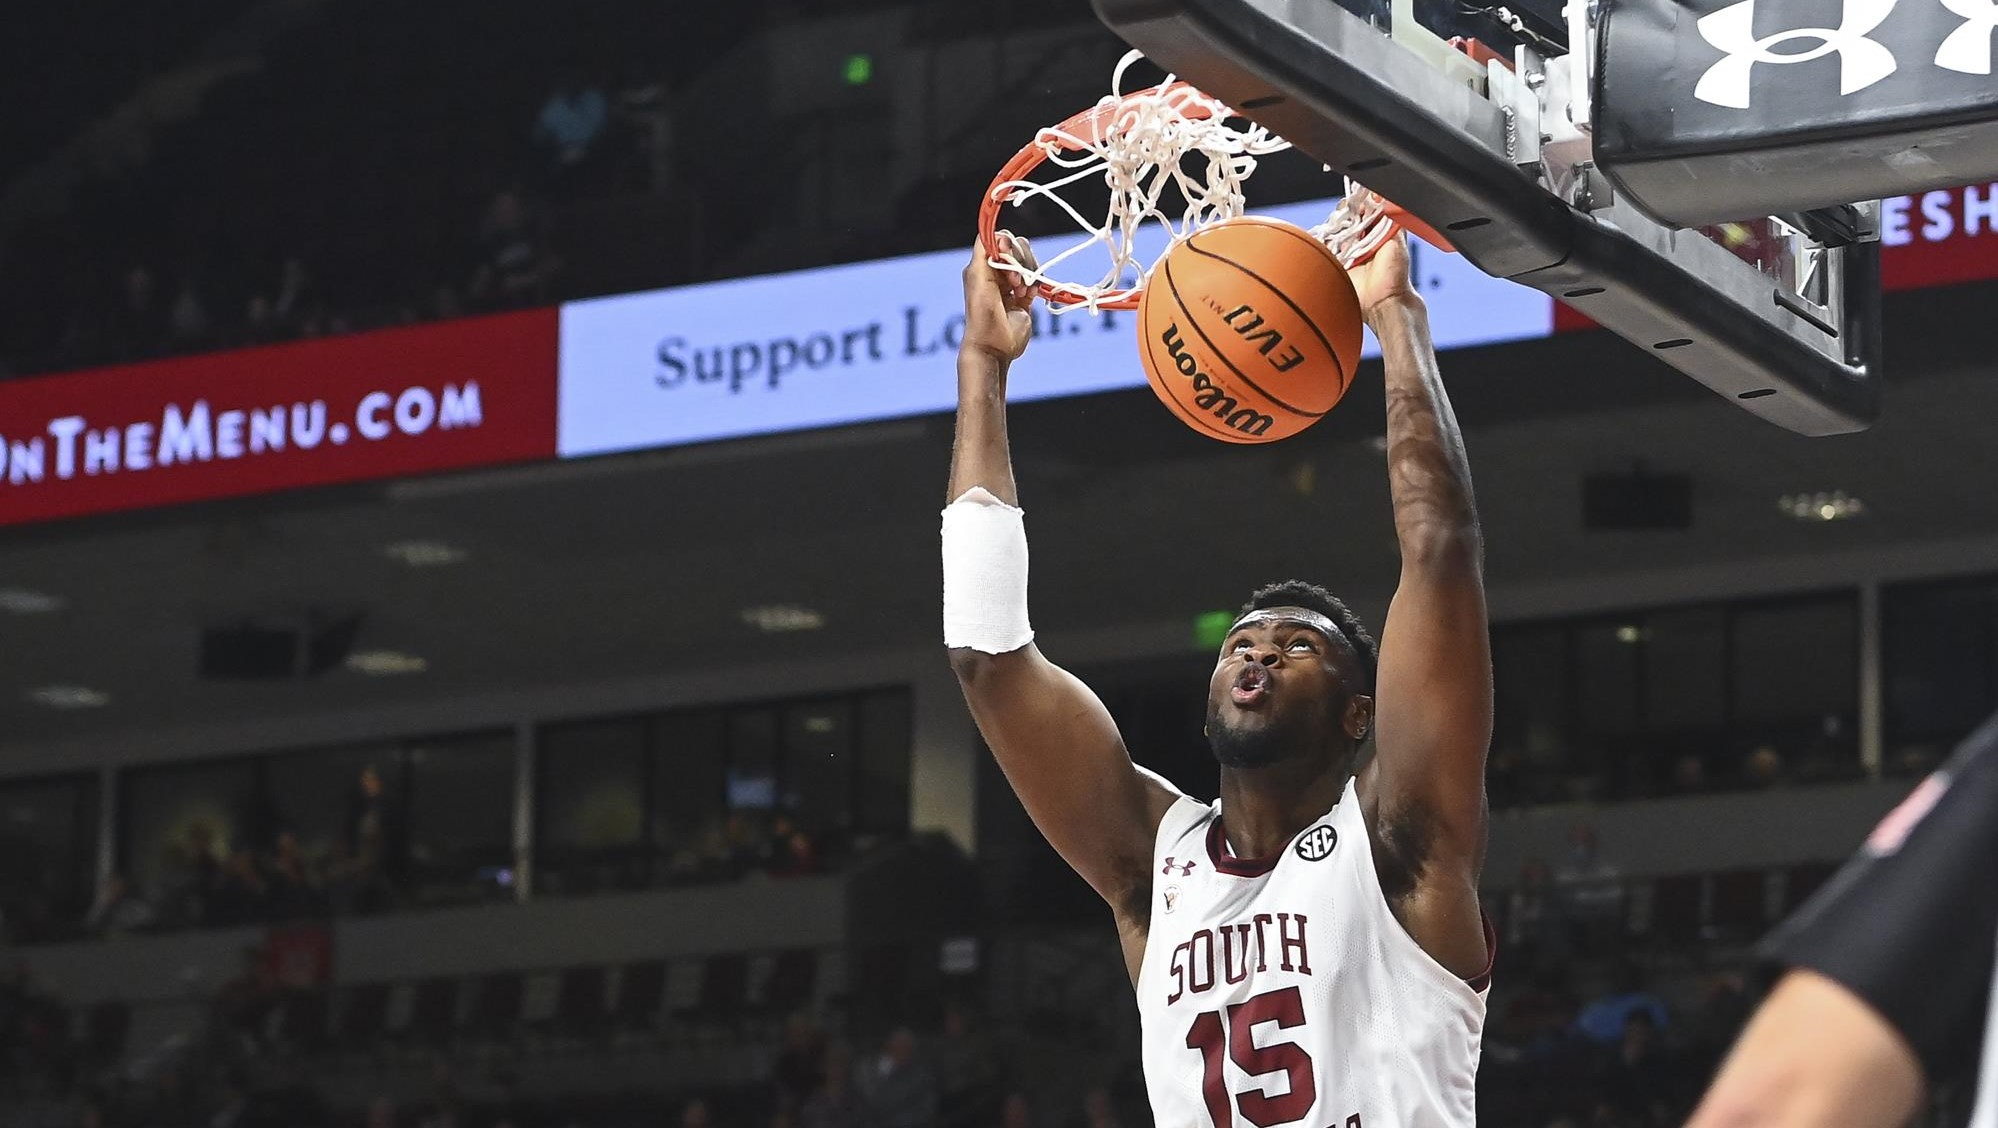 Leveque leads balanced South Carolina past Georgetown 80-67